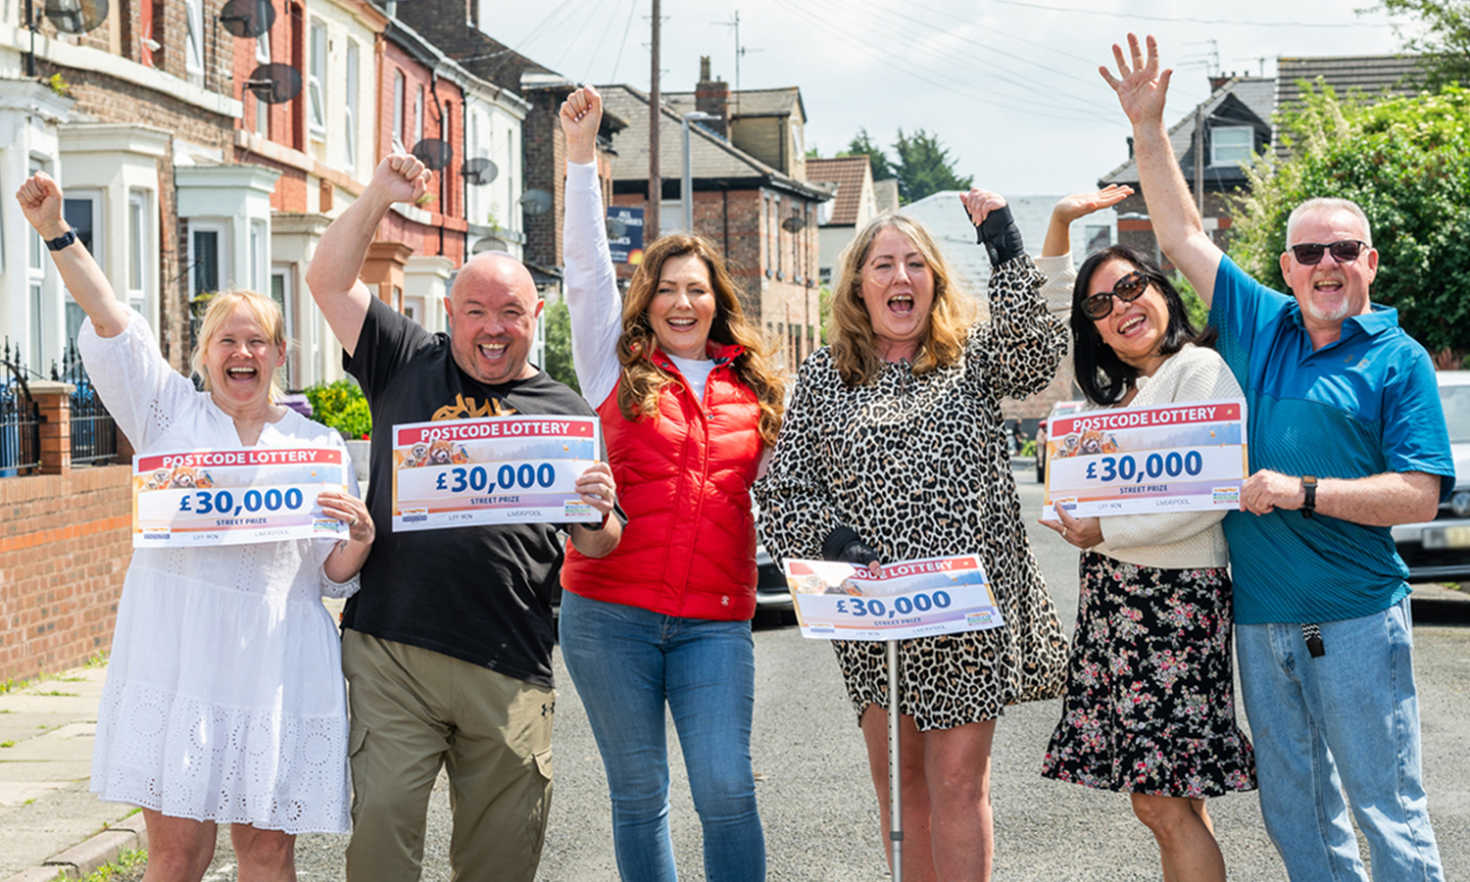 Our Winning Liverpool neighbours celebrate their £30,000 wins together